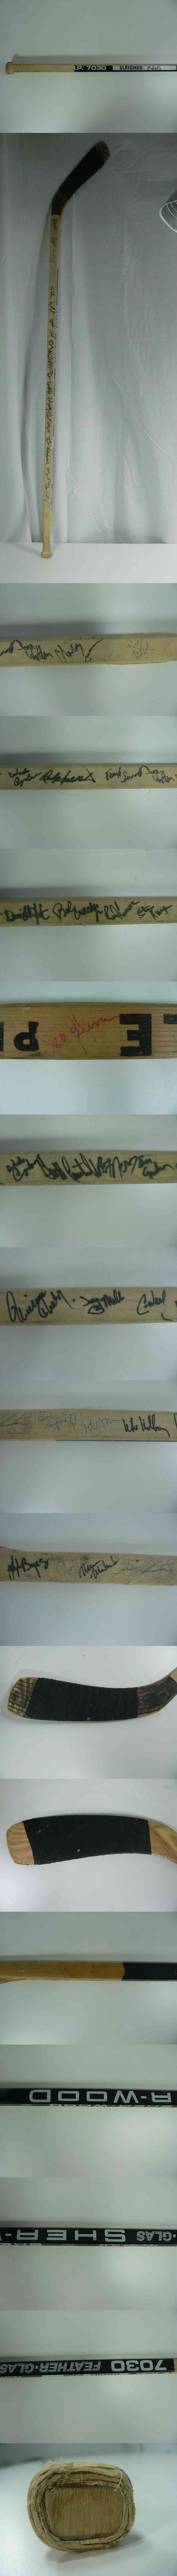 1980'S BOSTON BRUINS L. SLEIGHER GAME USED STICK TEAM AUTOGRAPHED BY 24 photo